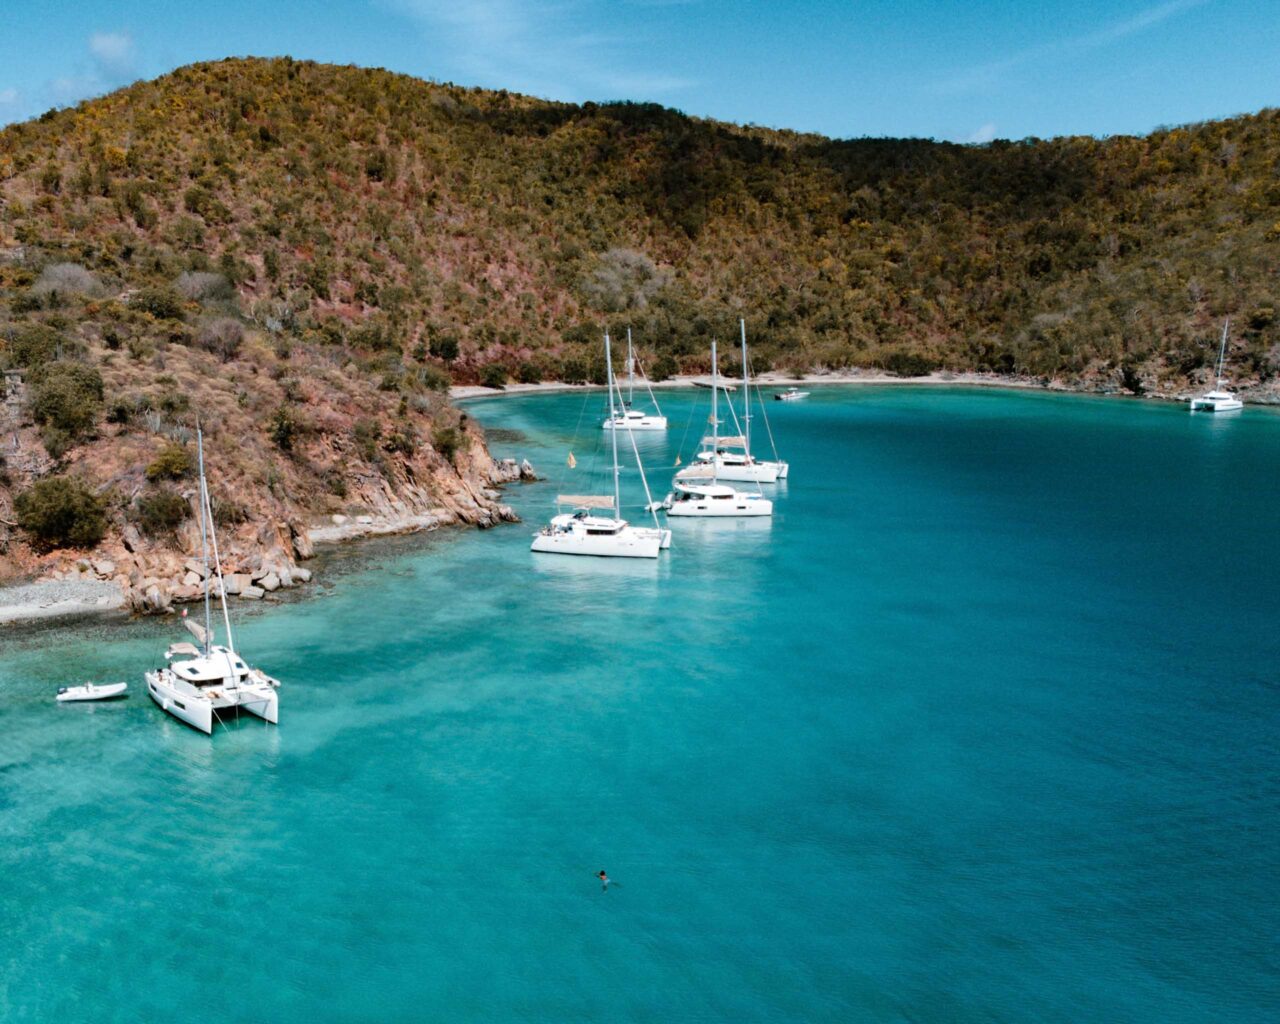 A group of sailboats docked in the water near a hill.